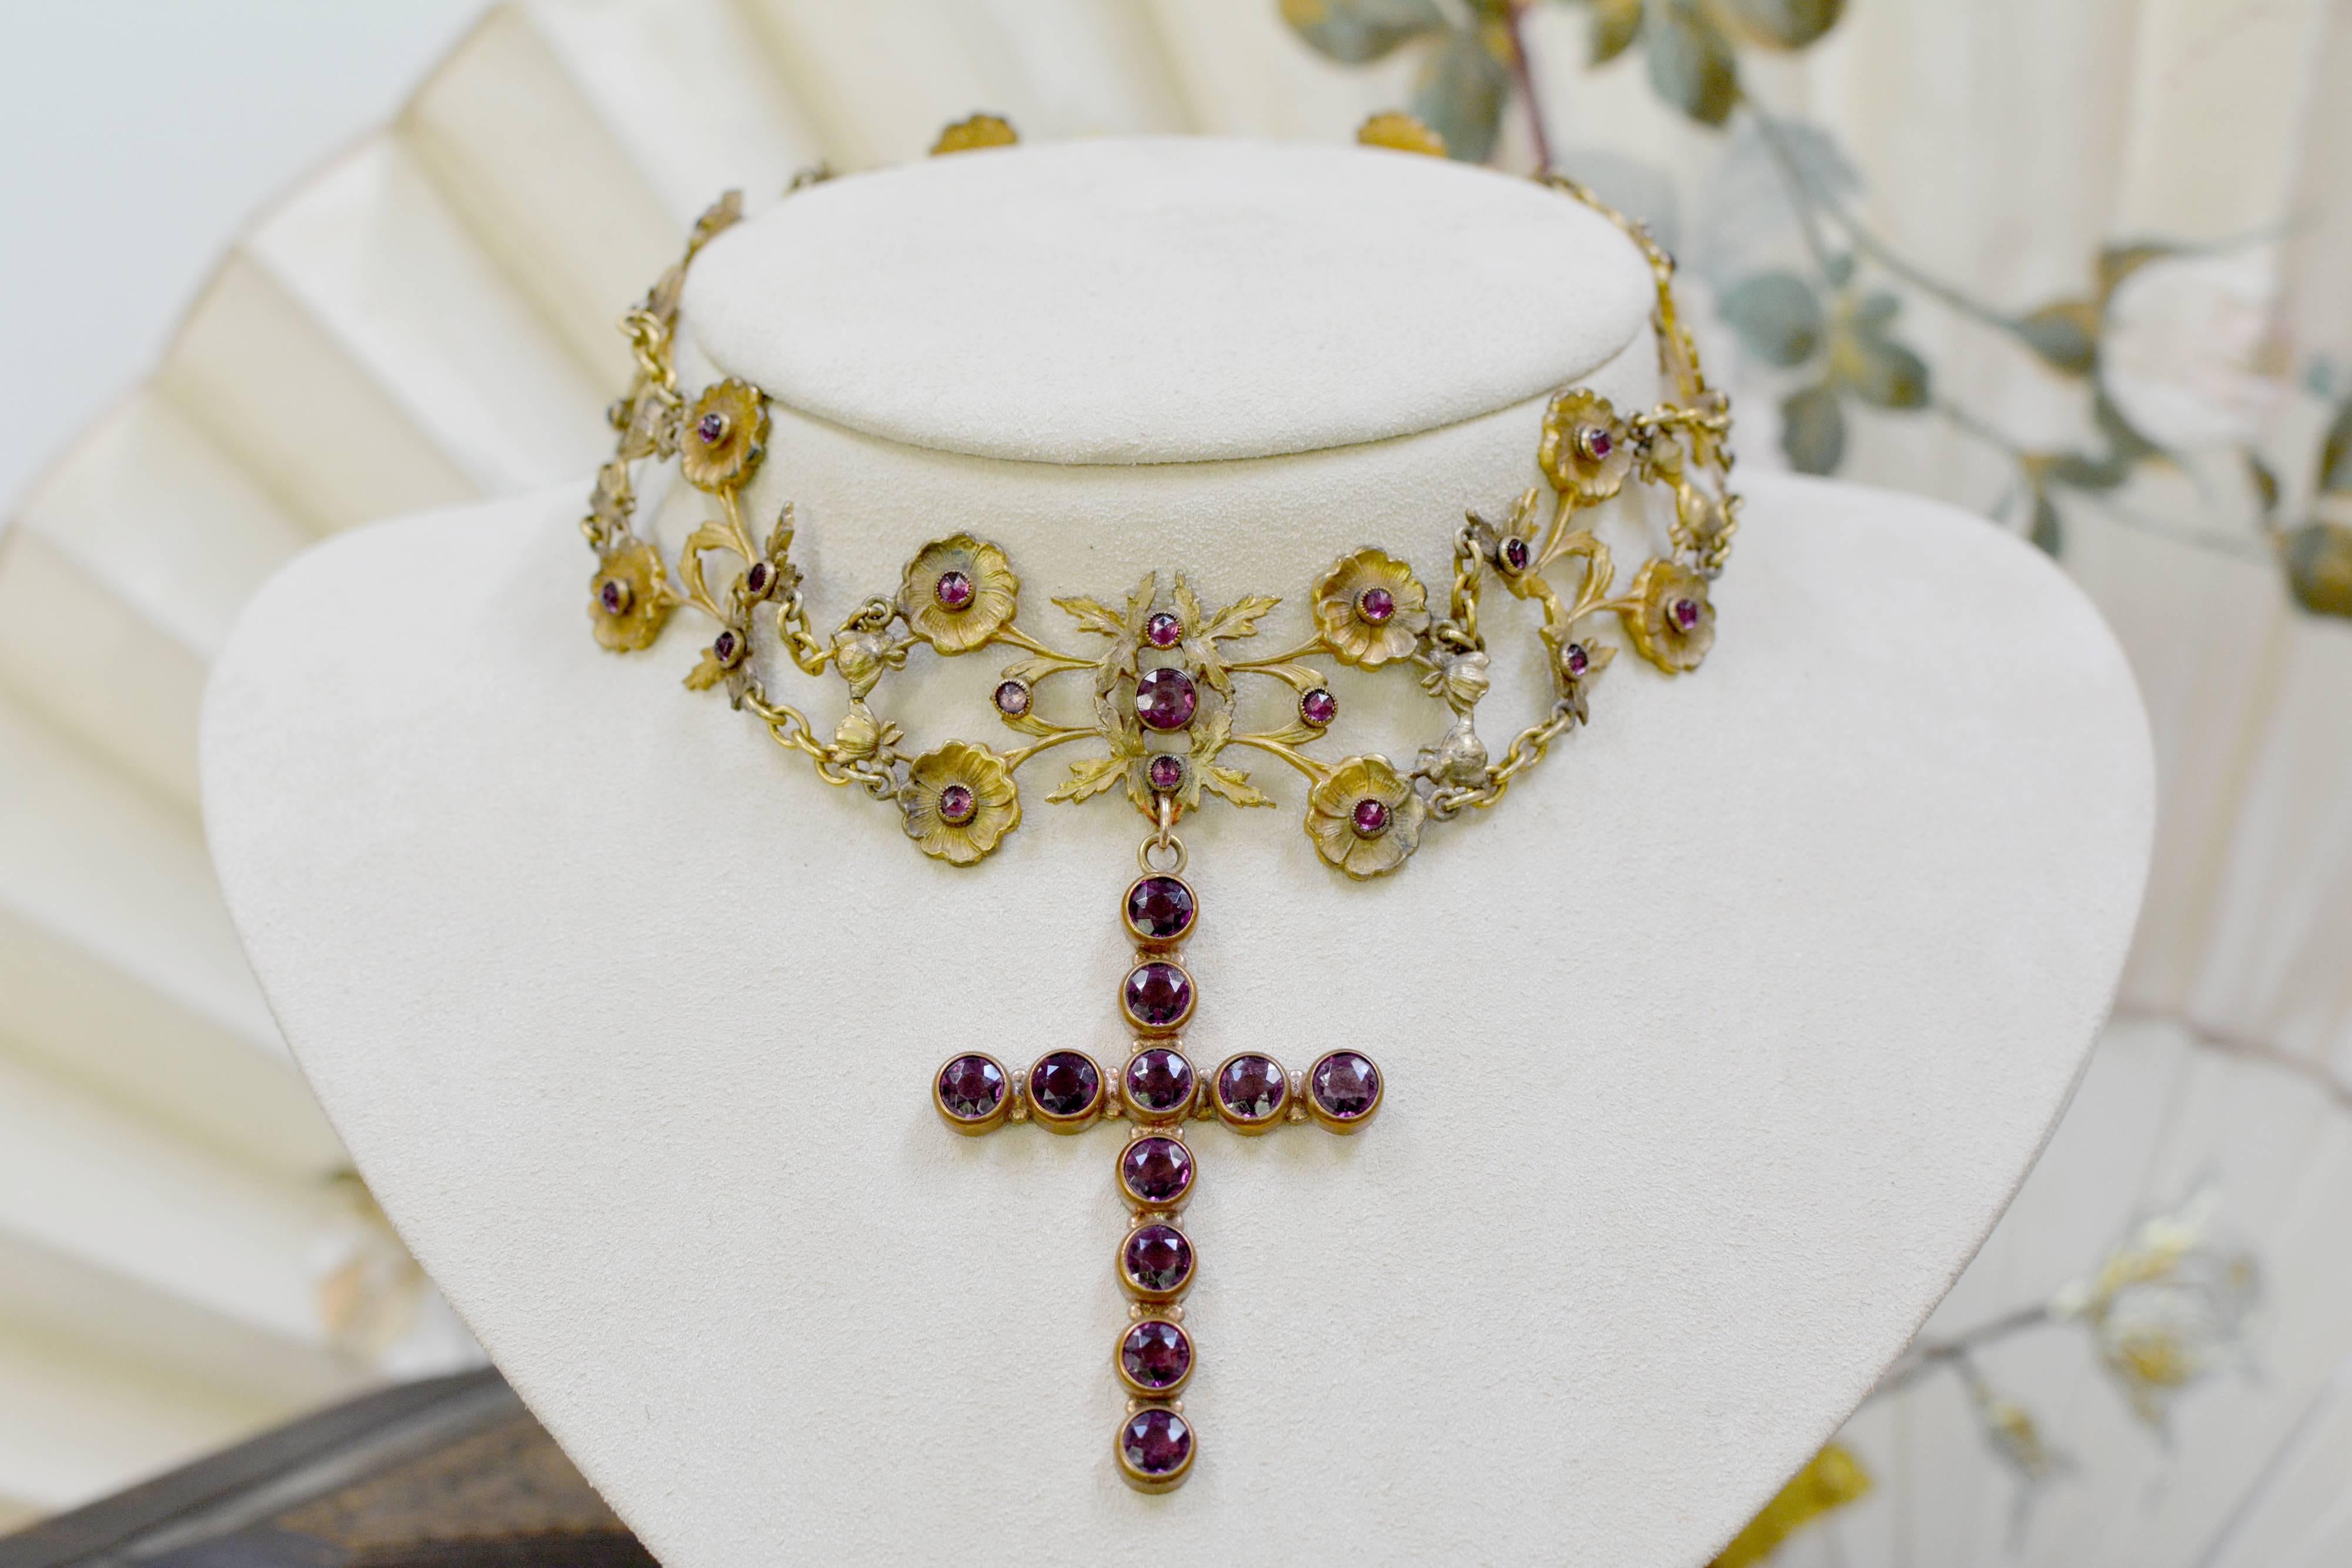 A fine original nineteenth century figural floral choker in gold vermeil with 33 faceted old cut, high dome paste amethyst forms the structure of this exquisite antique assemblage necklace. The large, old cut amethyst paste cross hangs 2.50 inches